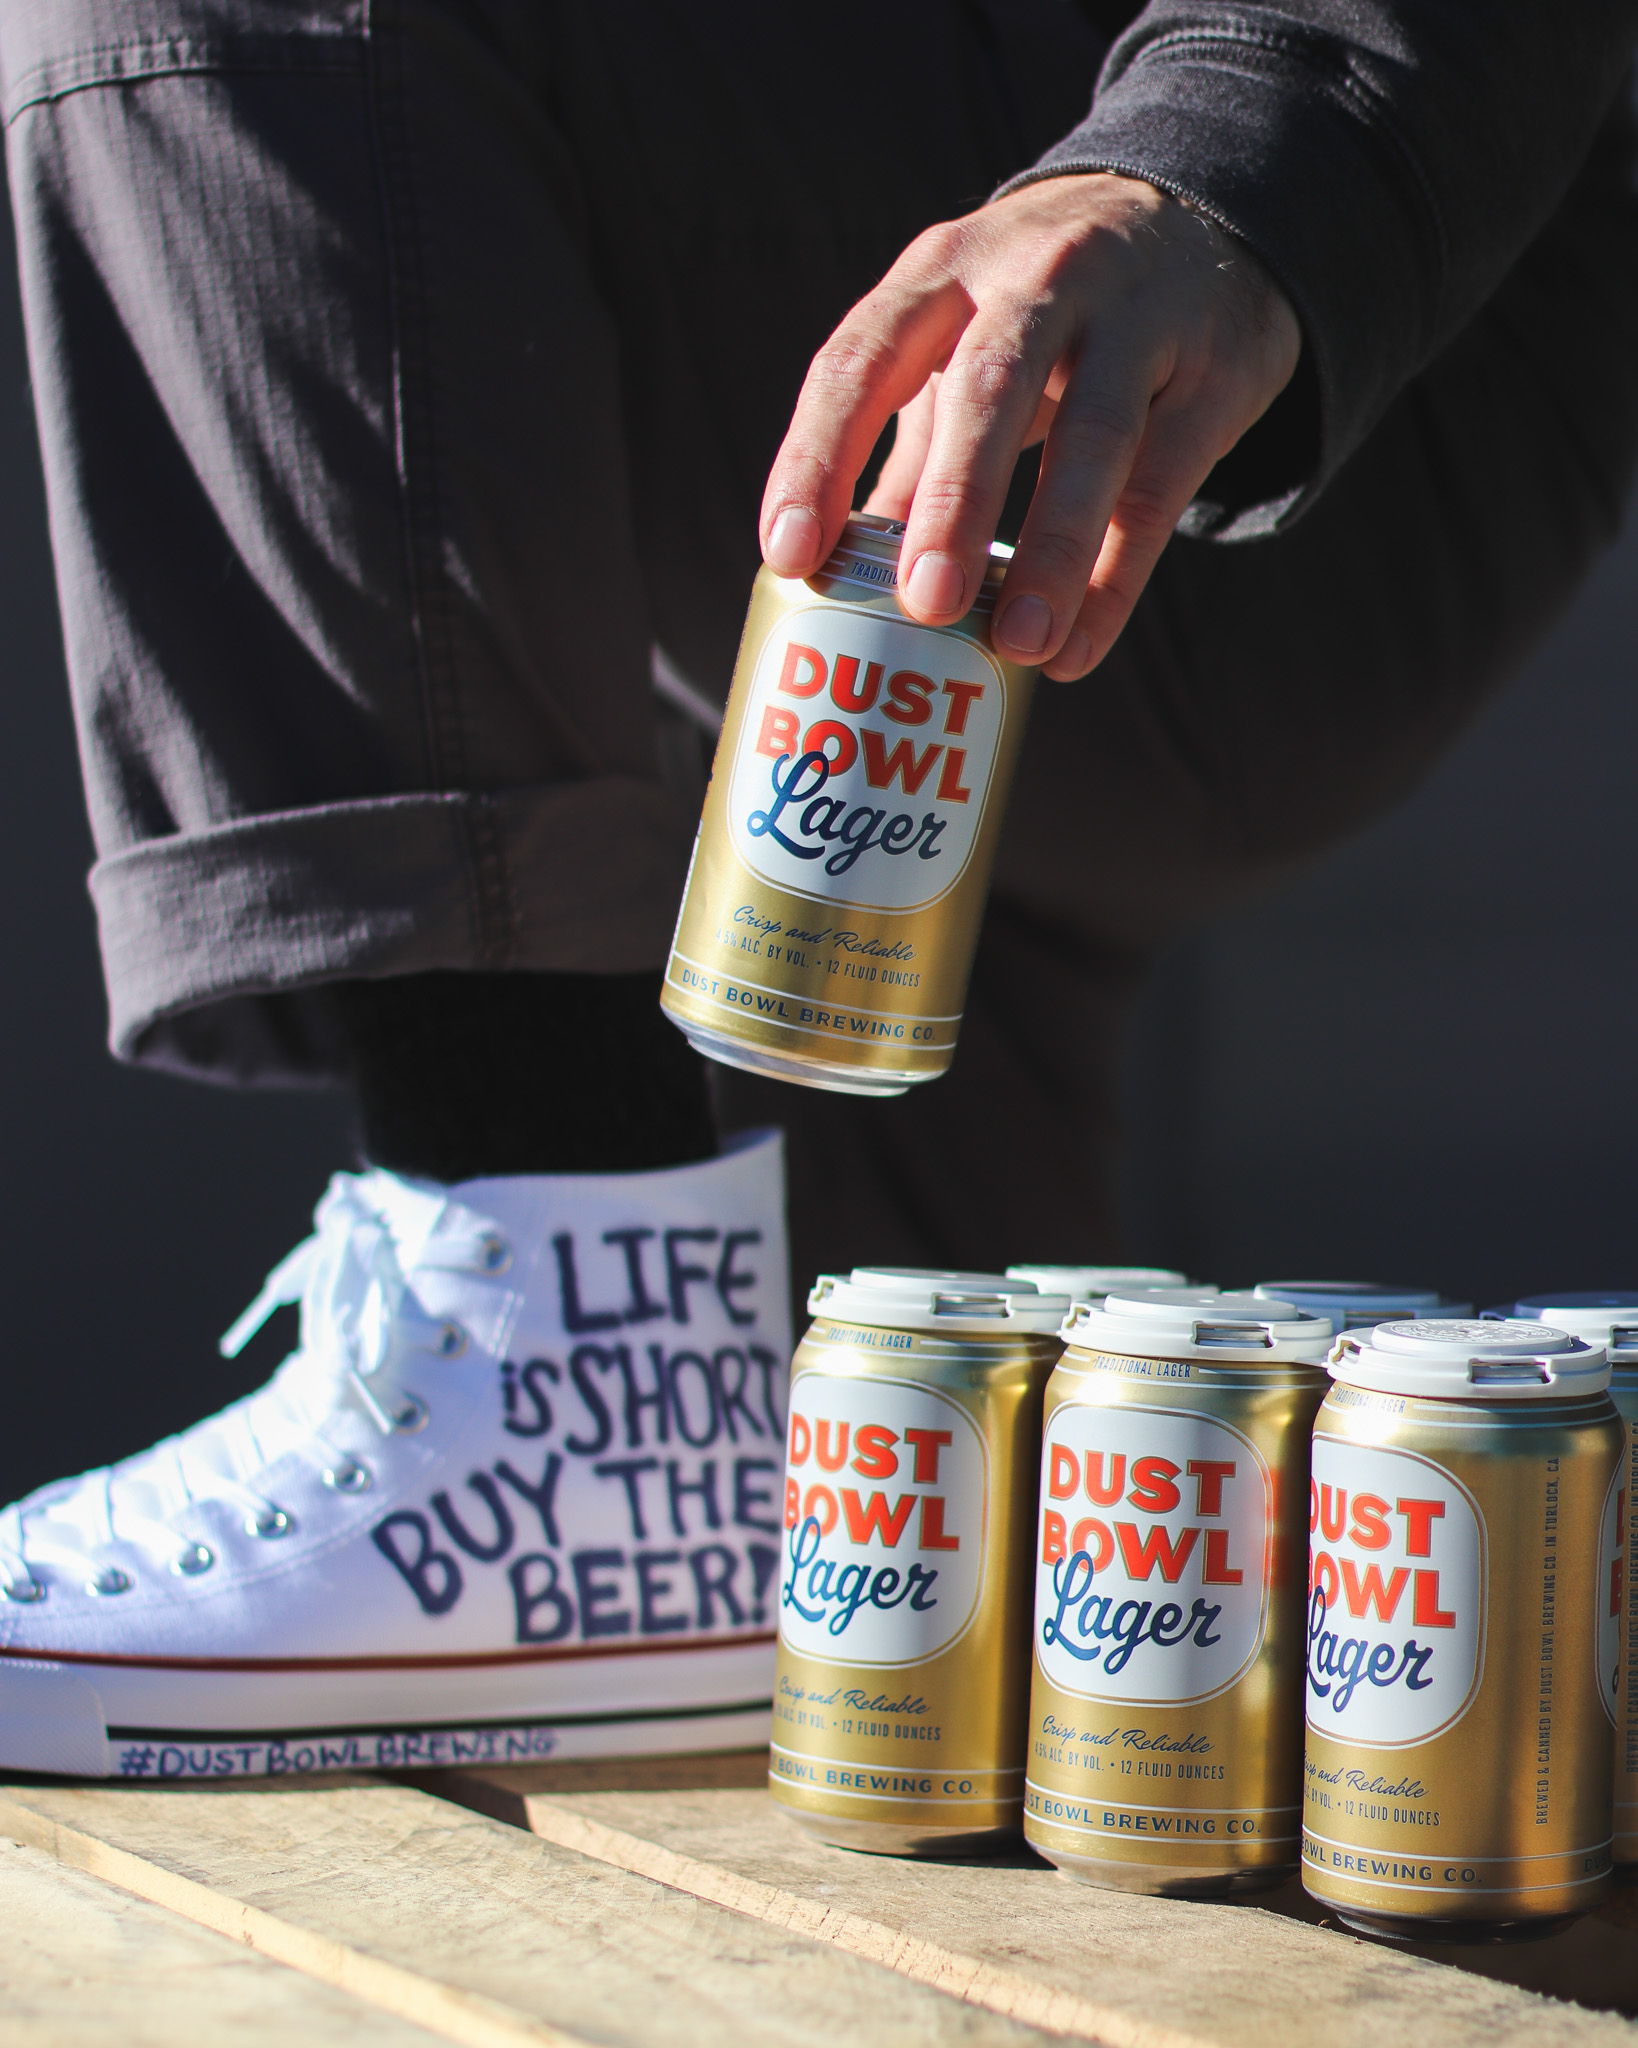 Dust Bowl Lager cans with white converse in background